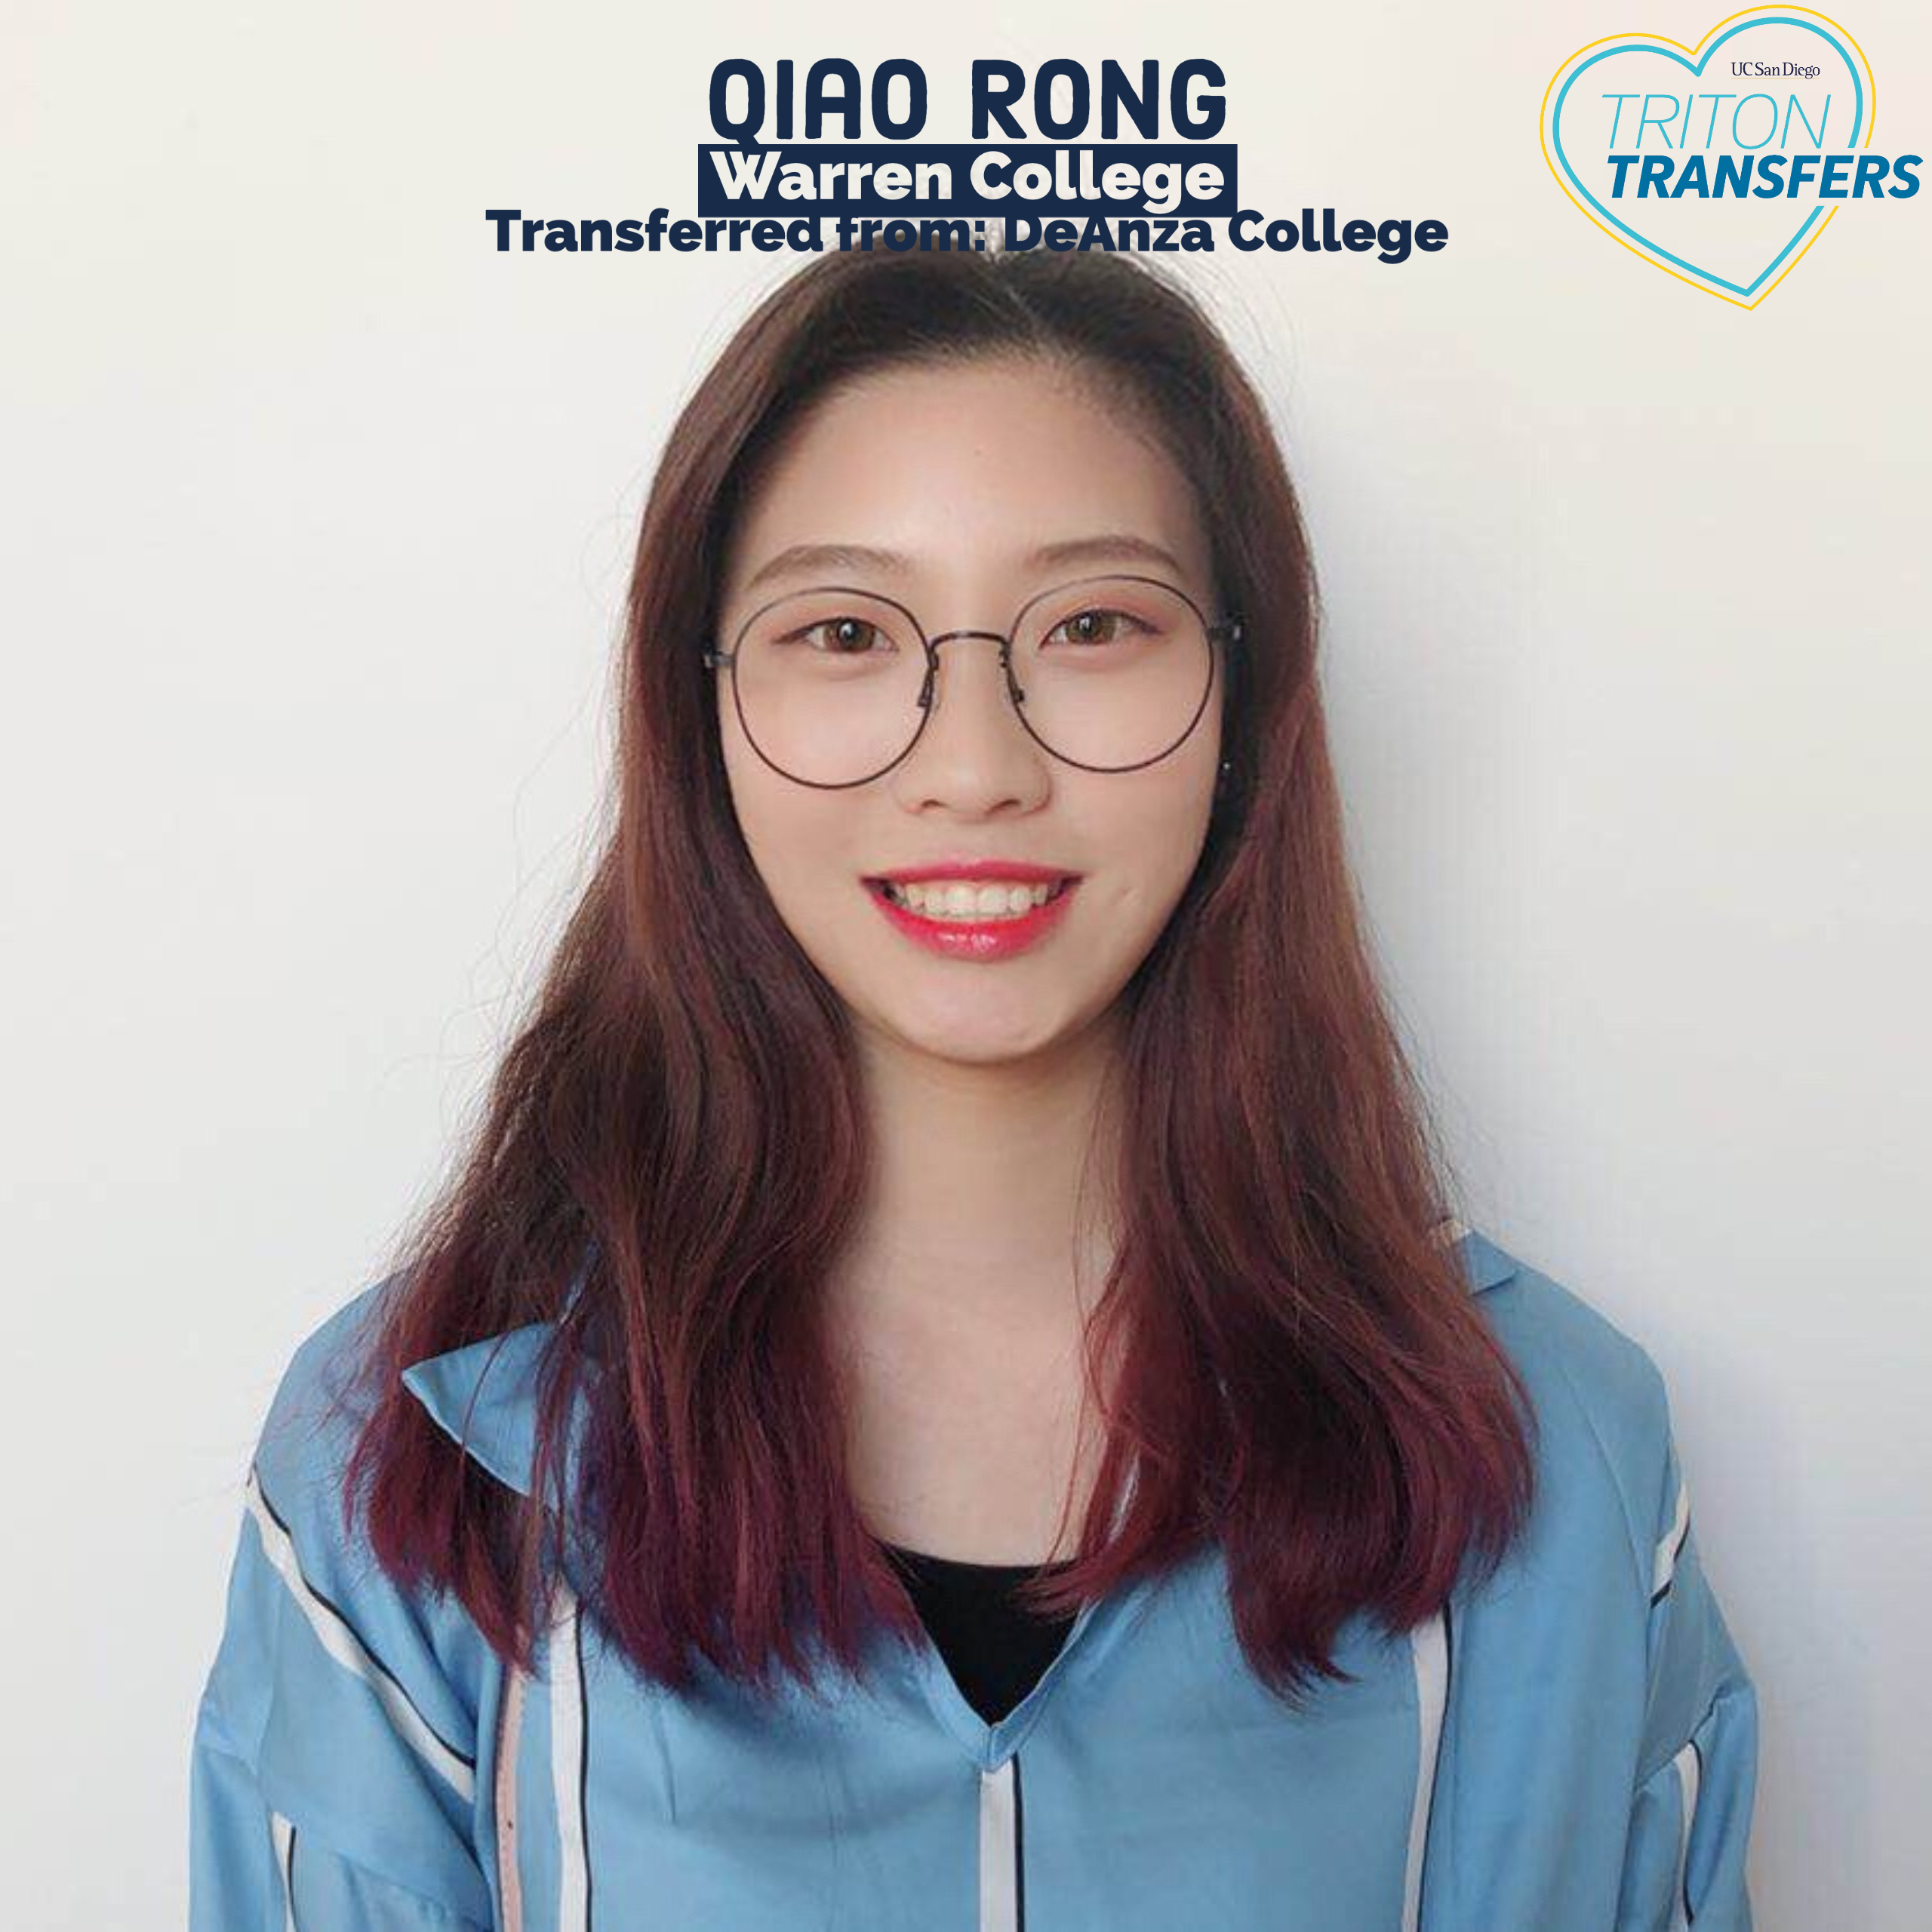 Qiao Rong Email: rongqiaorachel@gmail.com Warren College Transferred from: DeAnza College Major: Math-Computer Science Involvement: Research in SDSC Advice: Build your resume and try out different things at UCSD